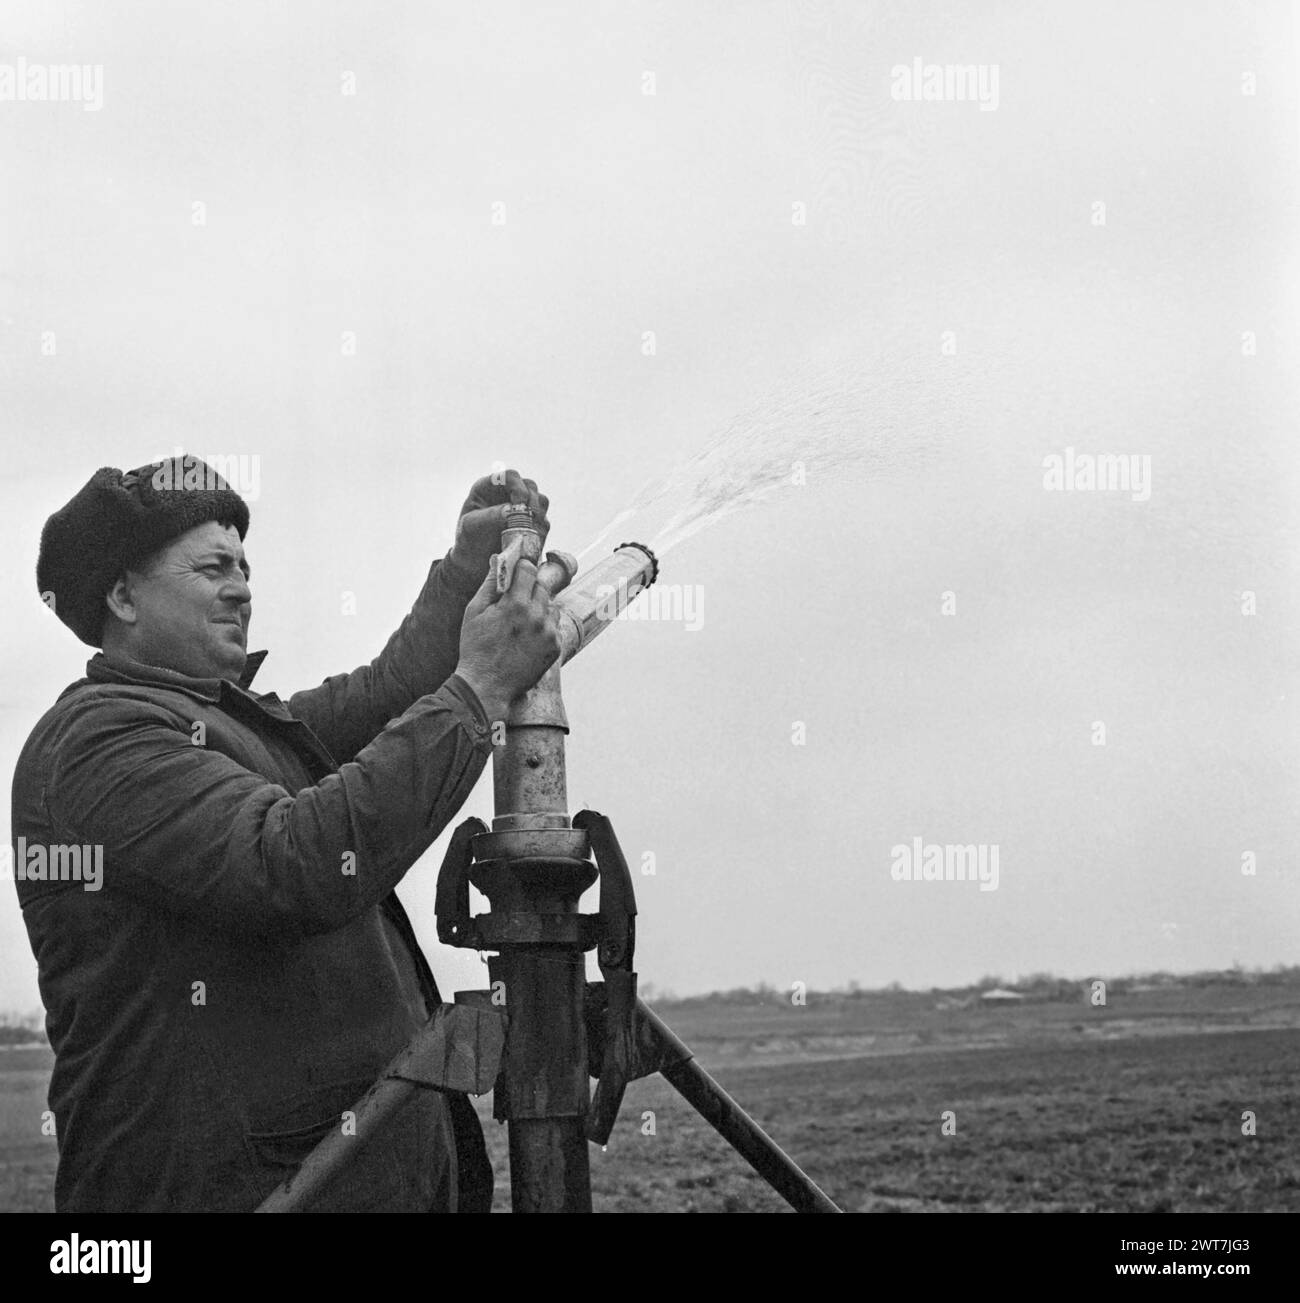 State agricultural cooperative in communist Romania, in the 1970s. Workers turning on the sprinklers. Stock Photo